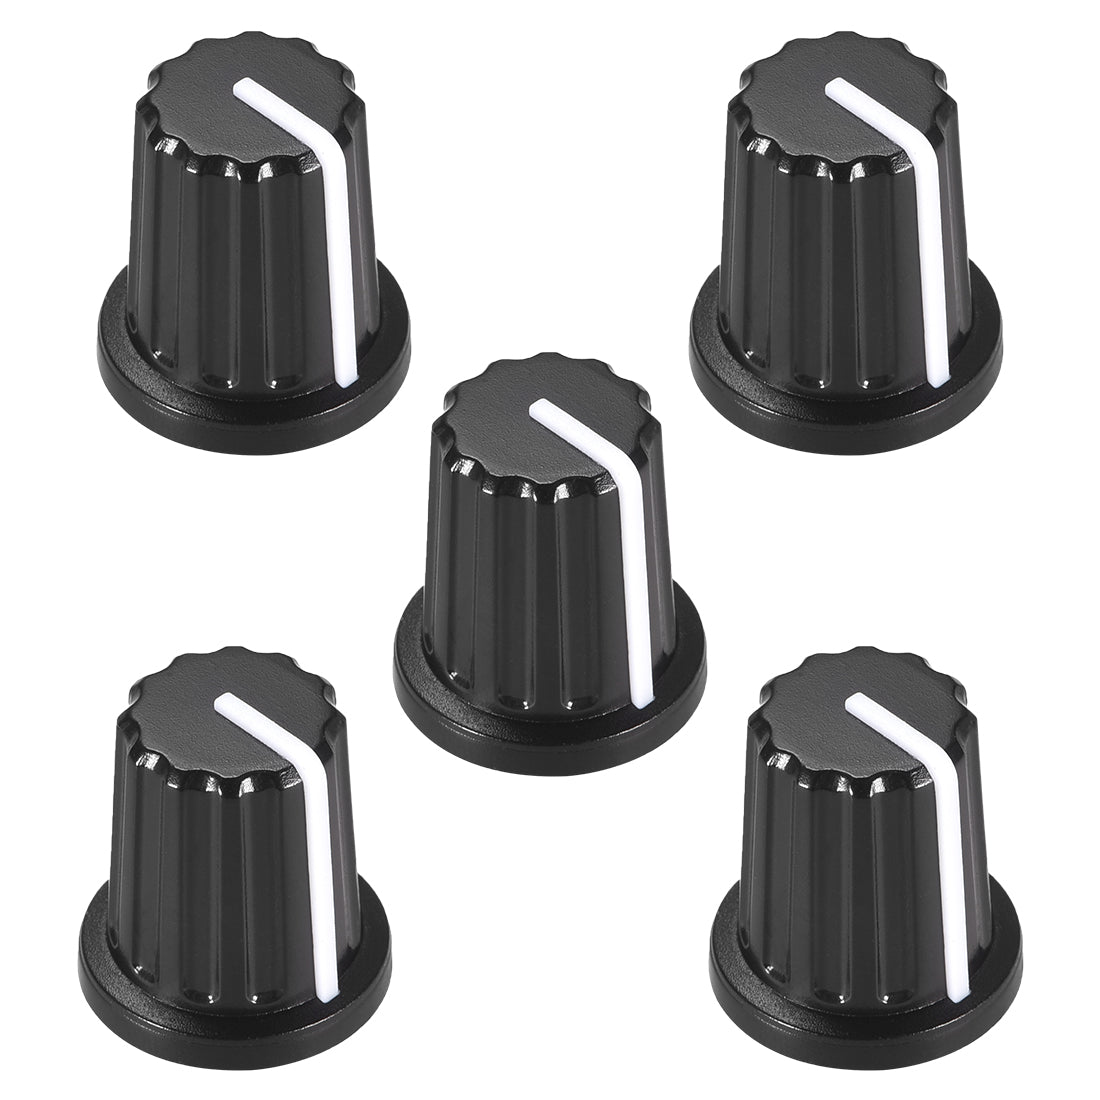 uxcell Uxcell 5pcs 4x6mm Potentiometer Knobs for Guitar Knobs Black White with Plastic Inside